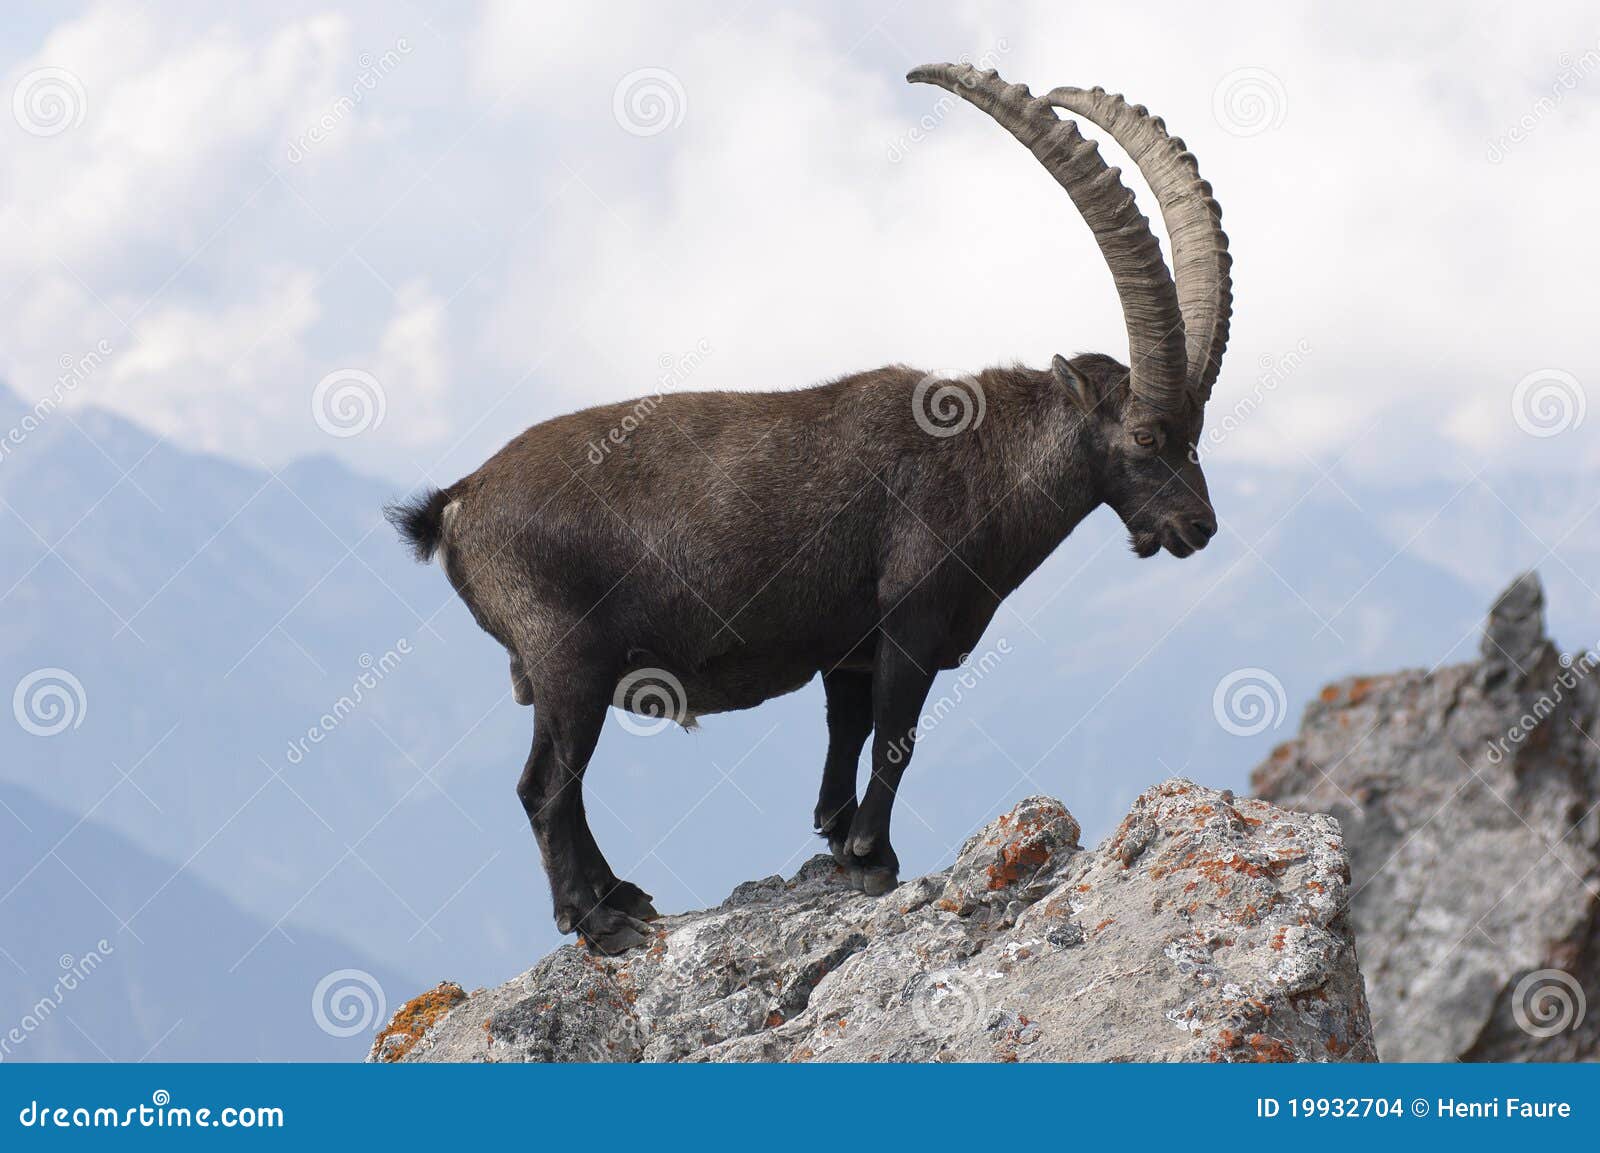 ibex on a rock